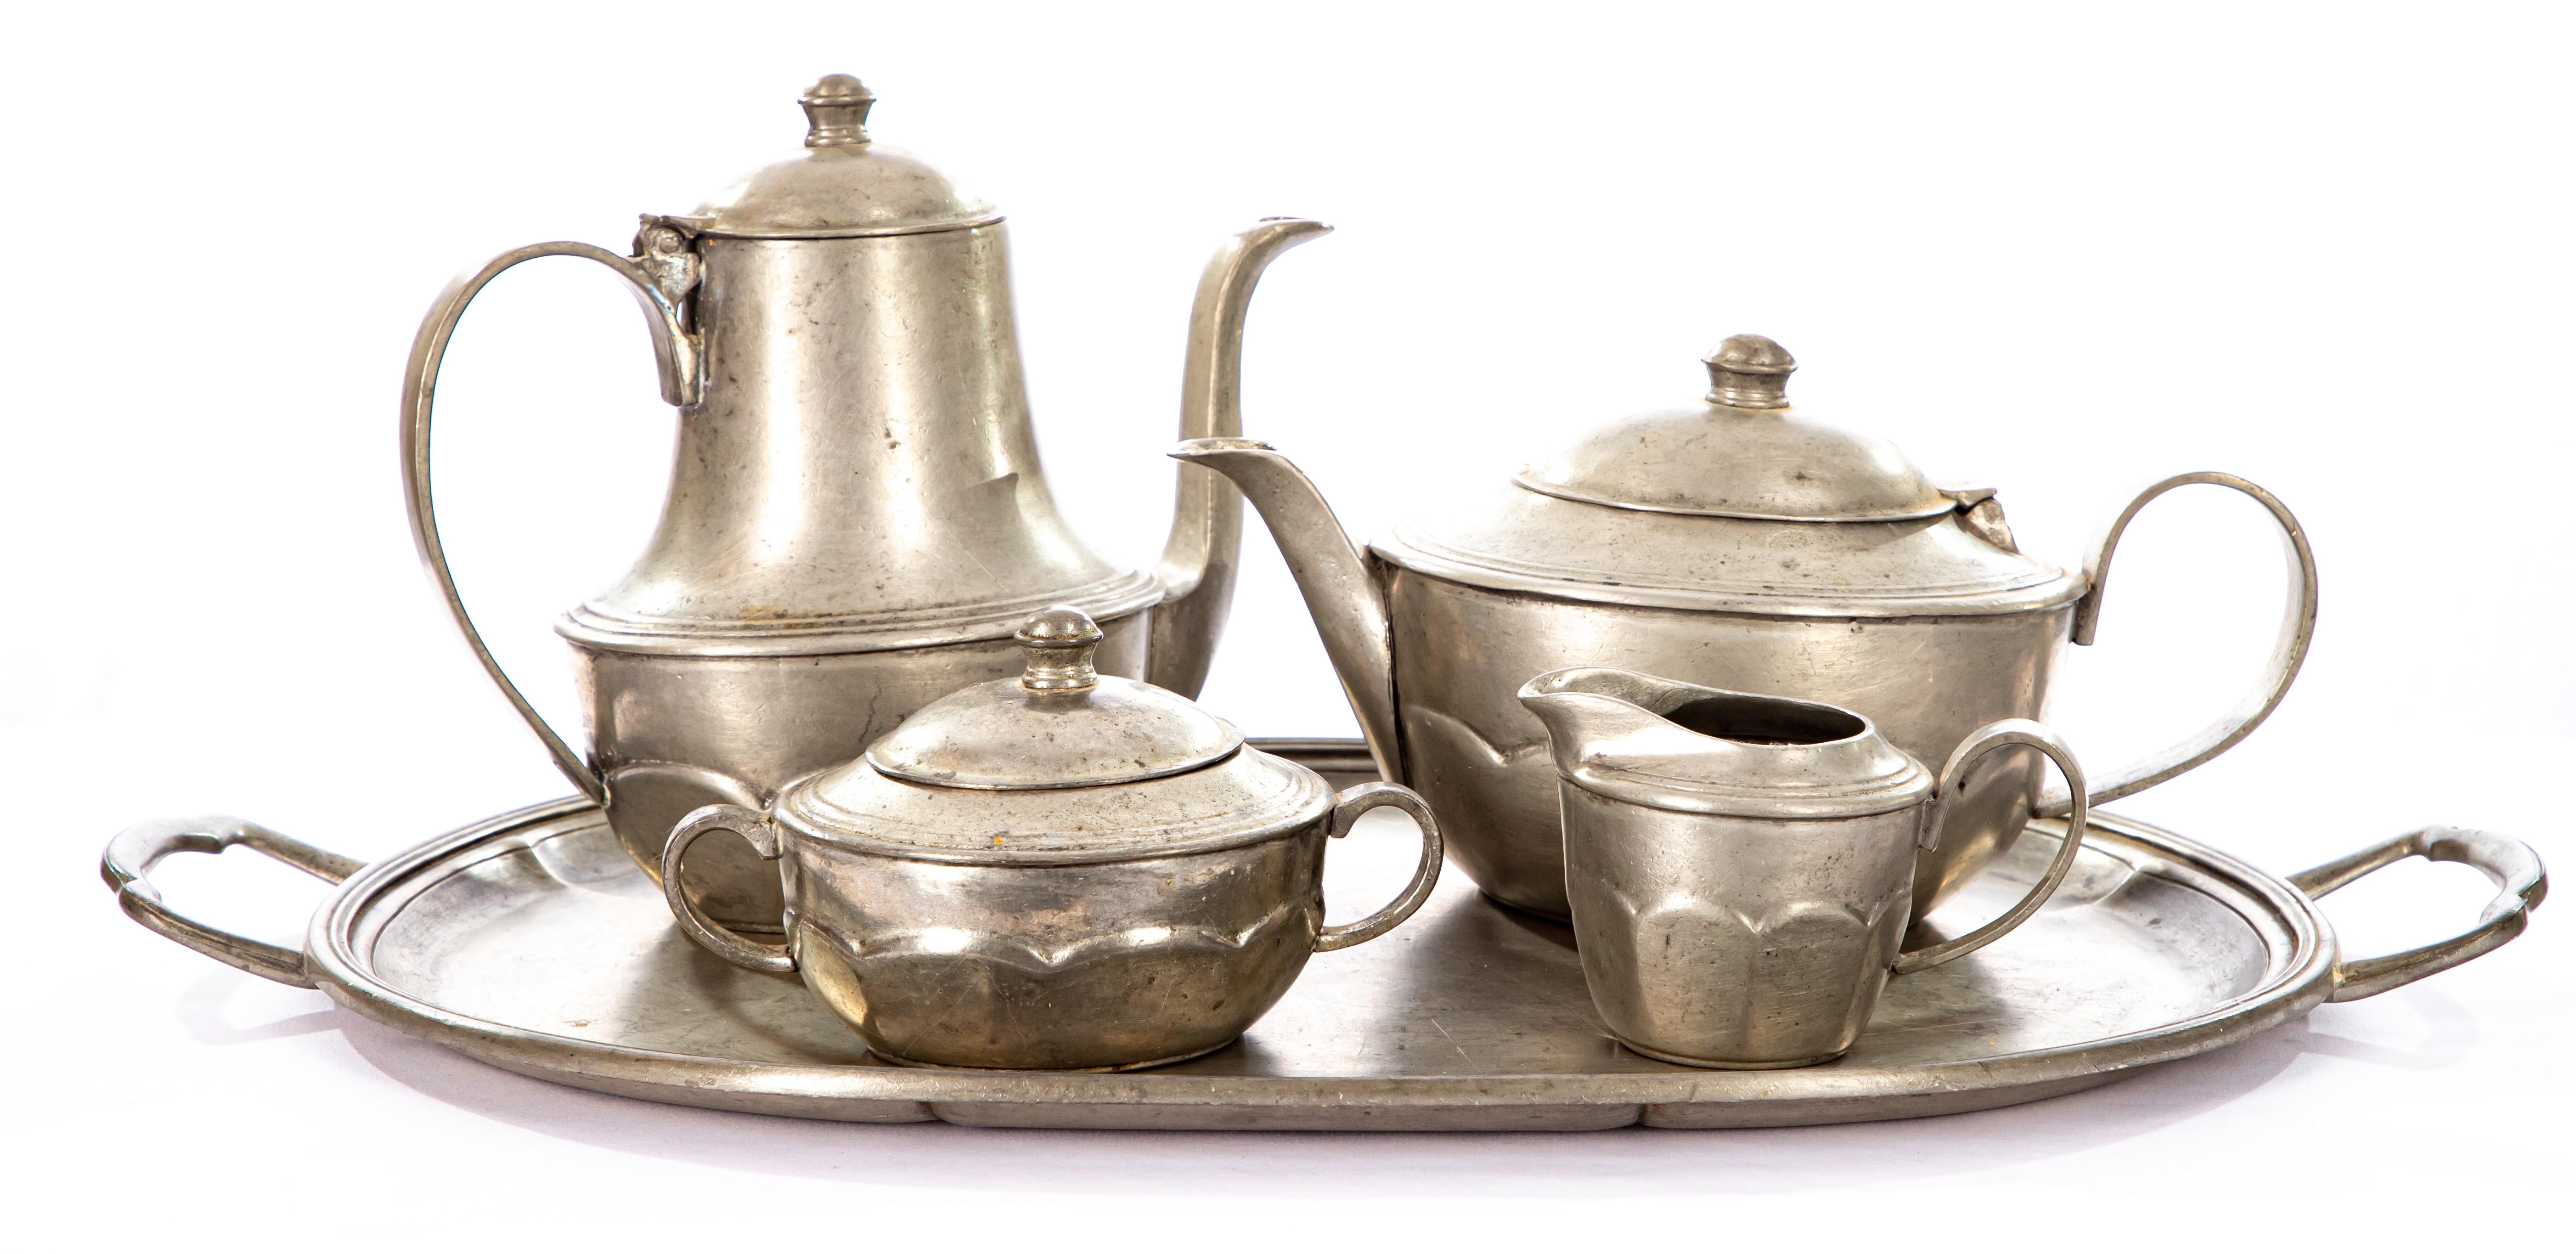 Offering this beautiful aged Italian pewter tea service. The service comes with a tray, creamer, sugar, short kettle and a tall kettle.